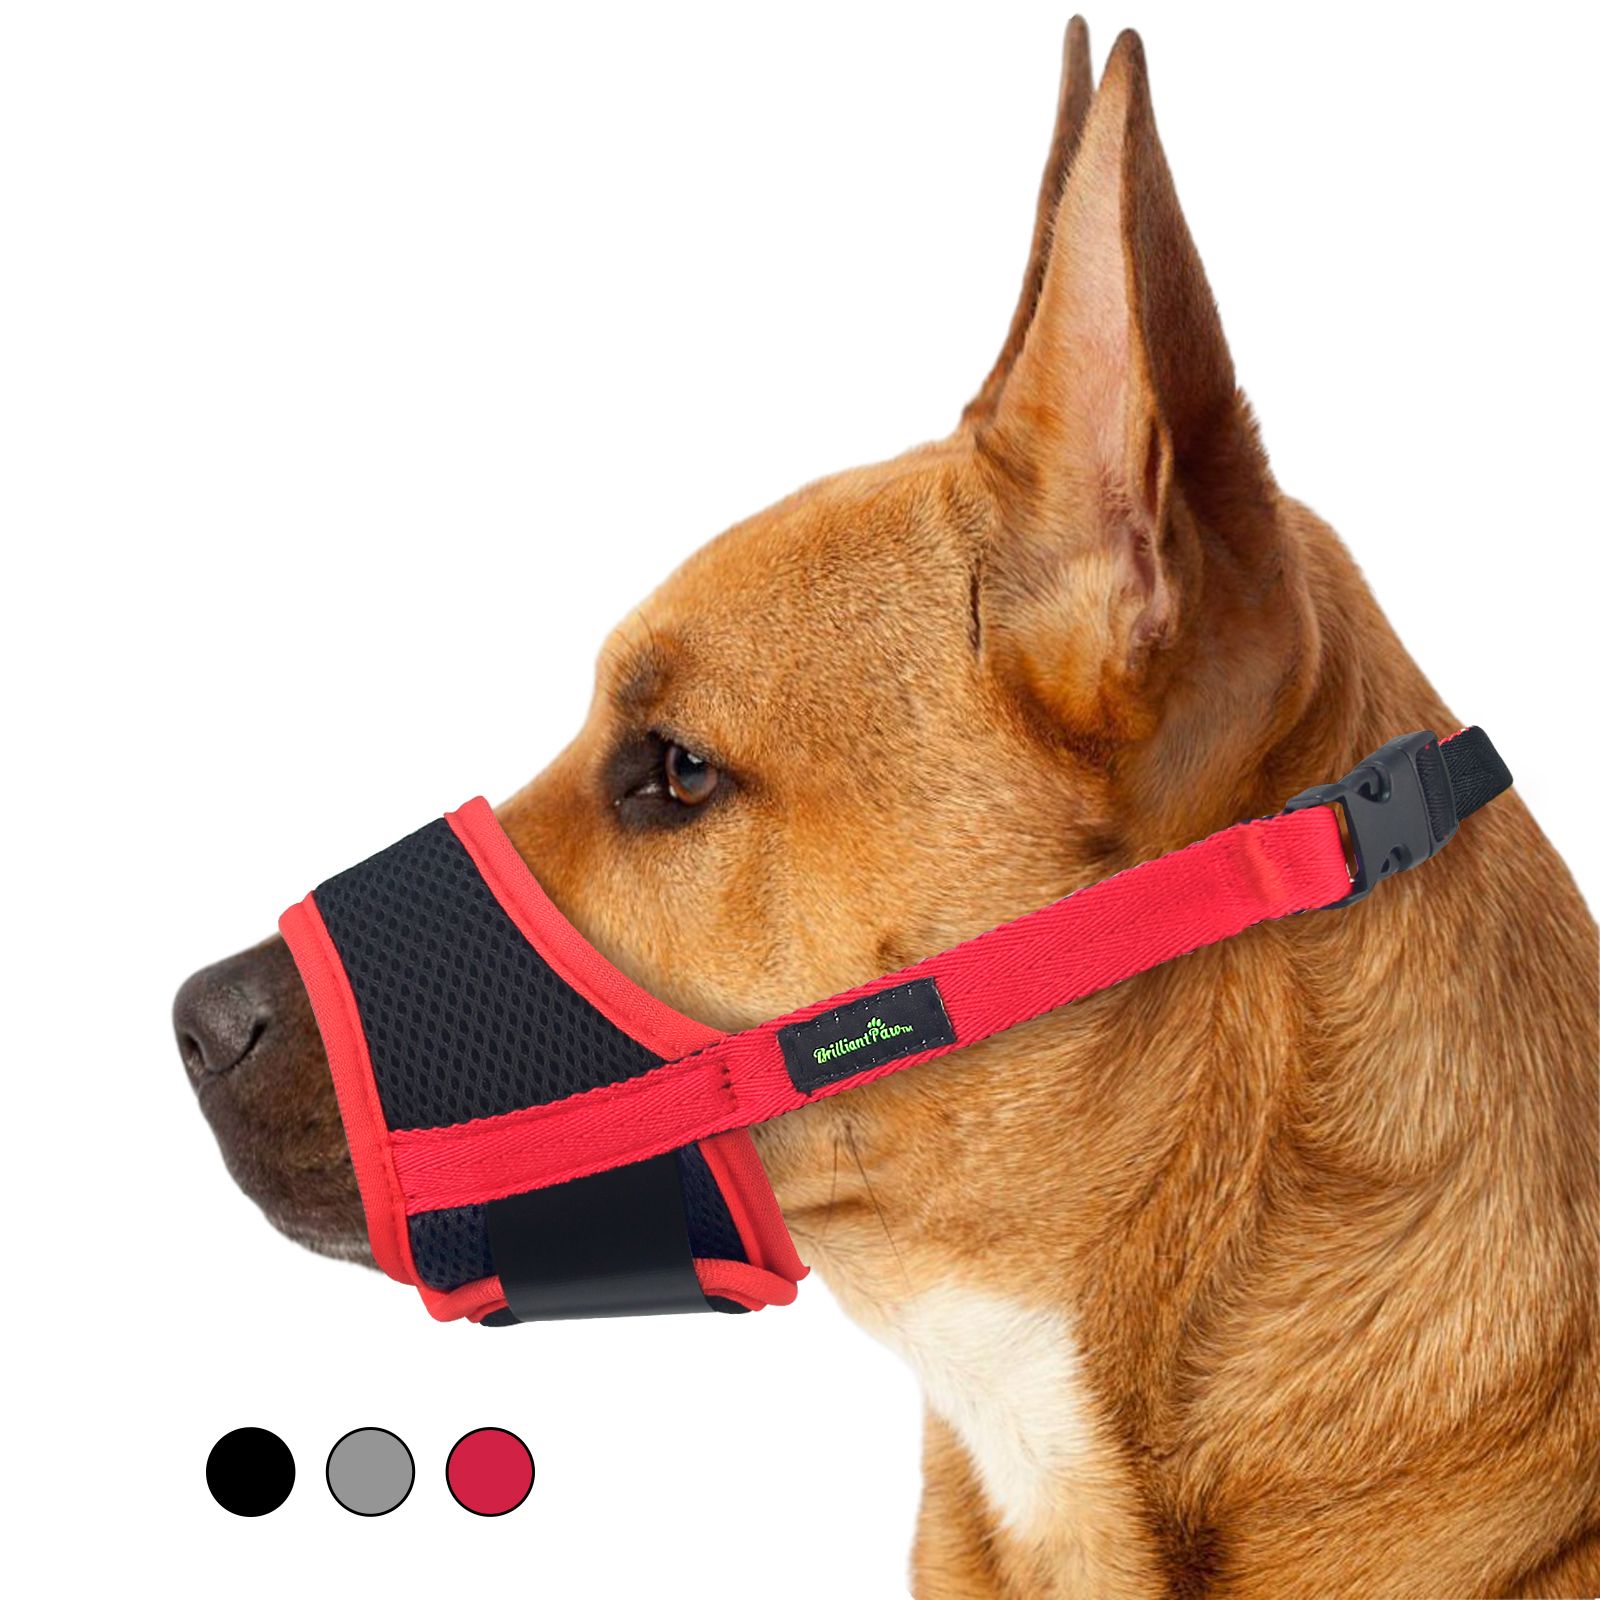 Wholesale Dog Muzzles In Stock.